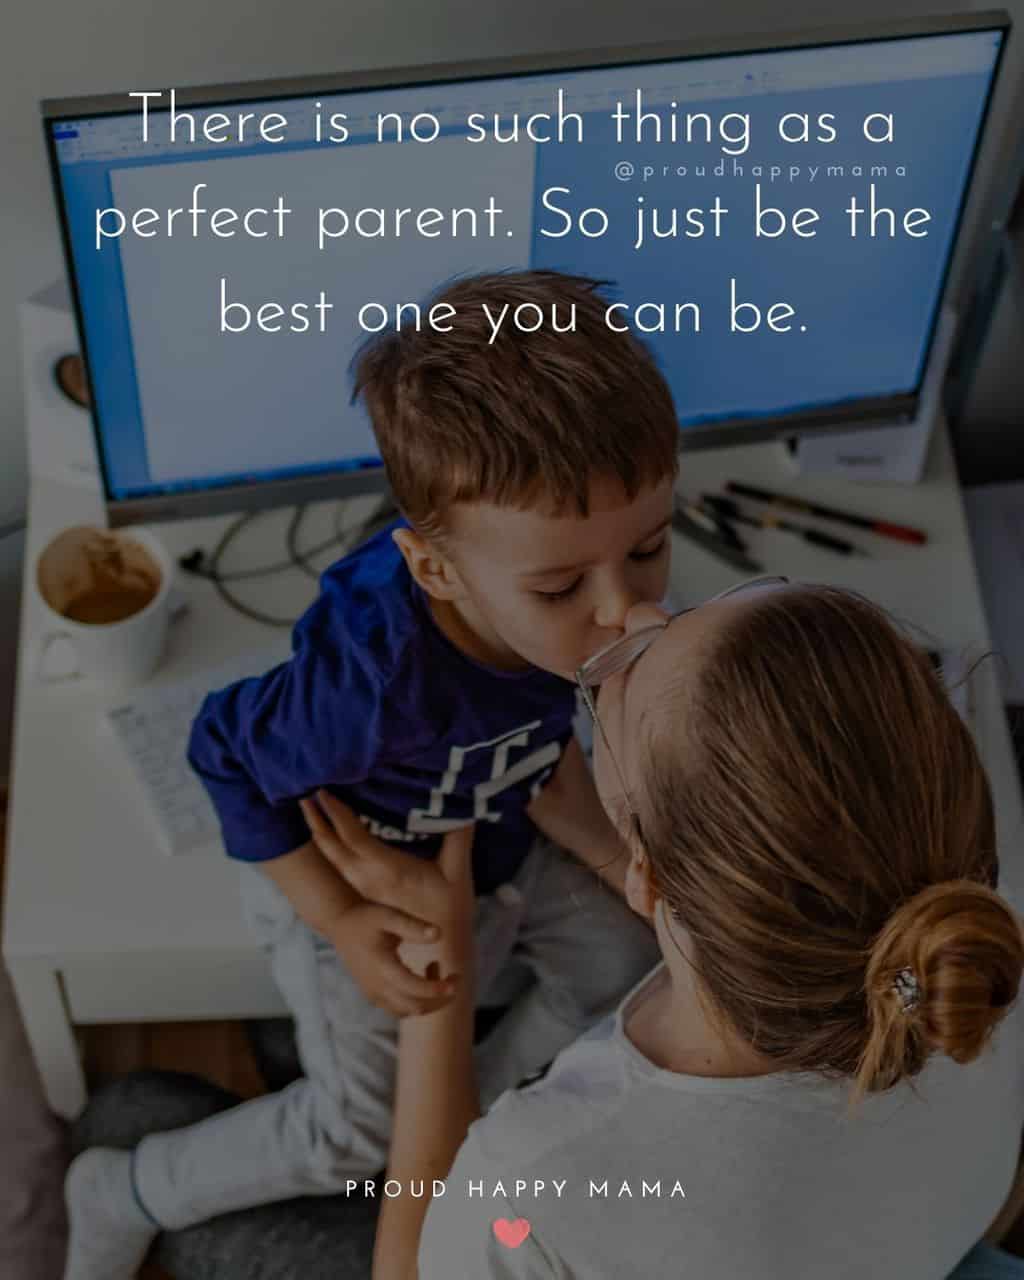 Parenting Quotes - There is no such thing as a perfect parent. So just be the best one you can be.’